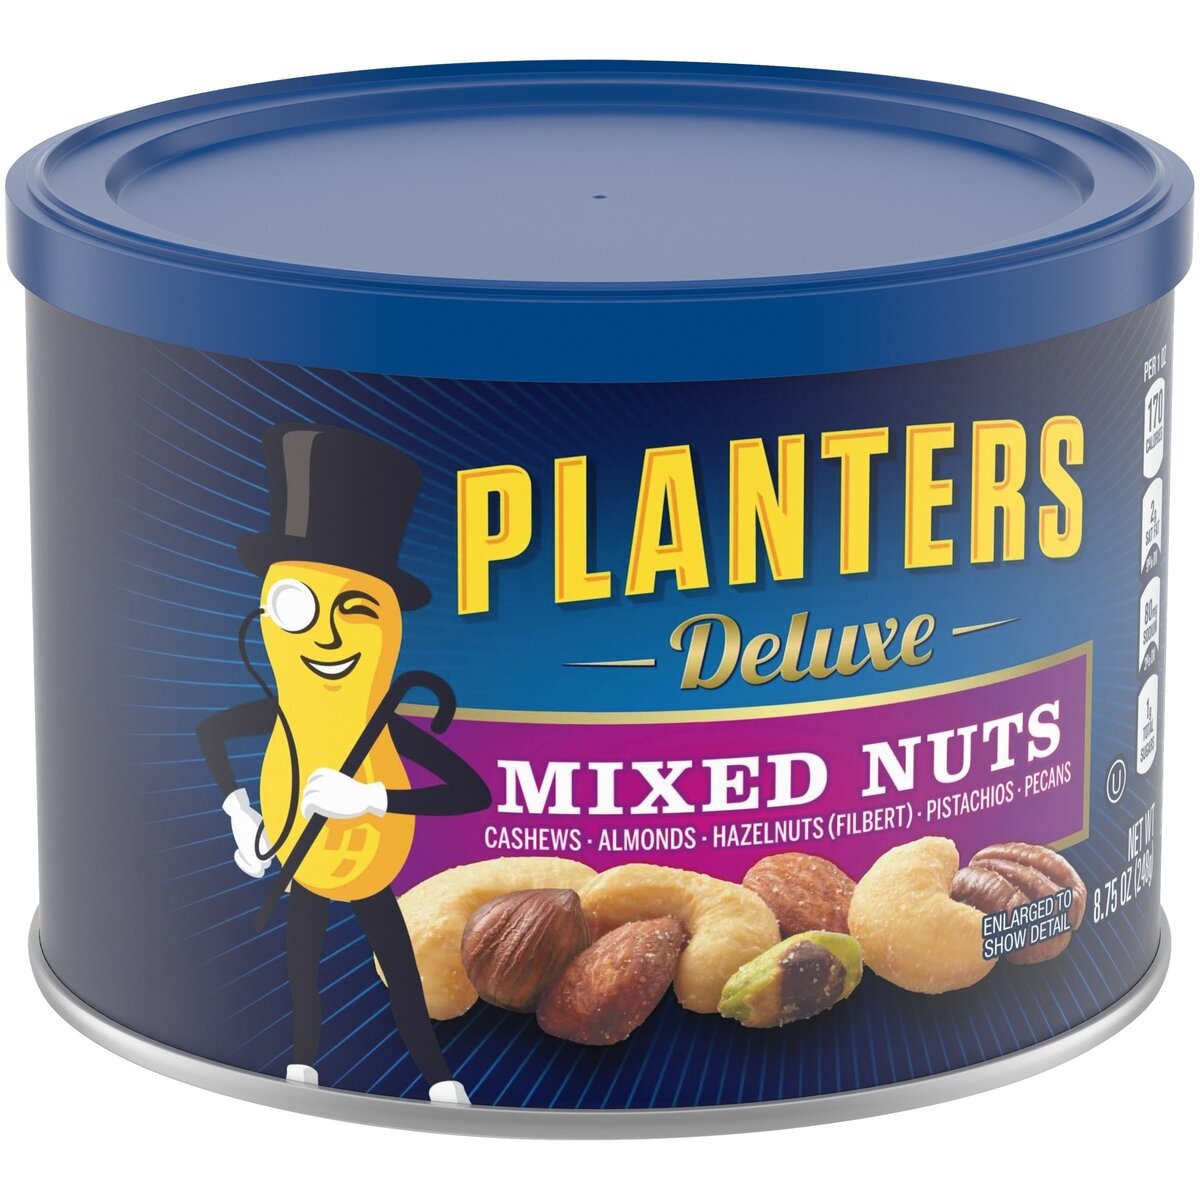 slide 2 of 2, Planters Deluxe Mixed Nuts with Cashews, Almonds, Hazelnuts, Pistachios & Pecans, 8.75 oz